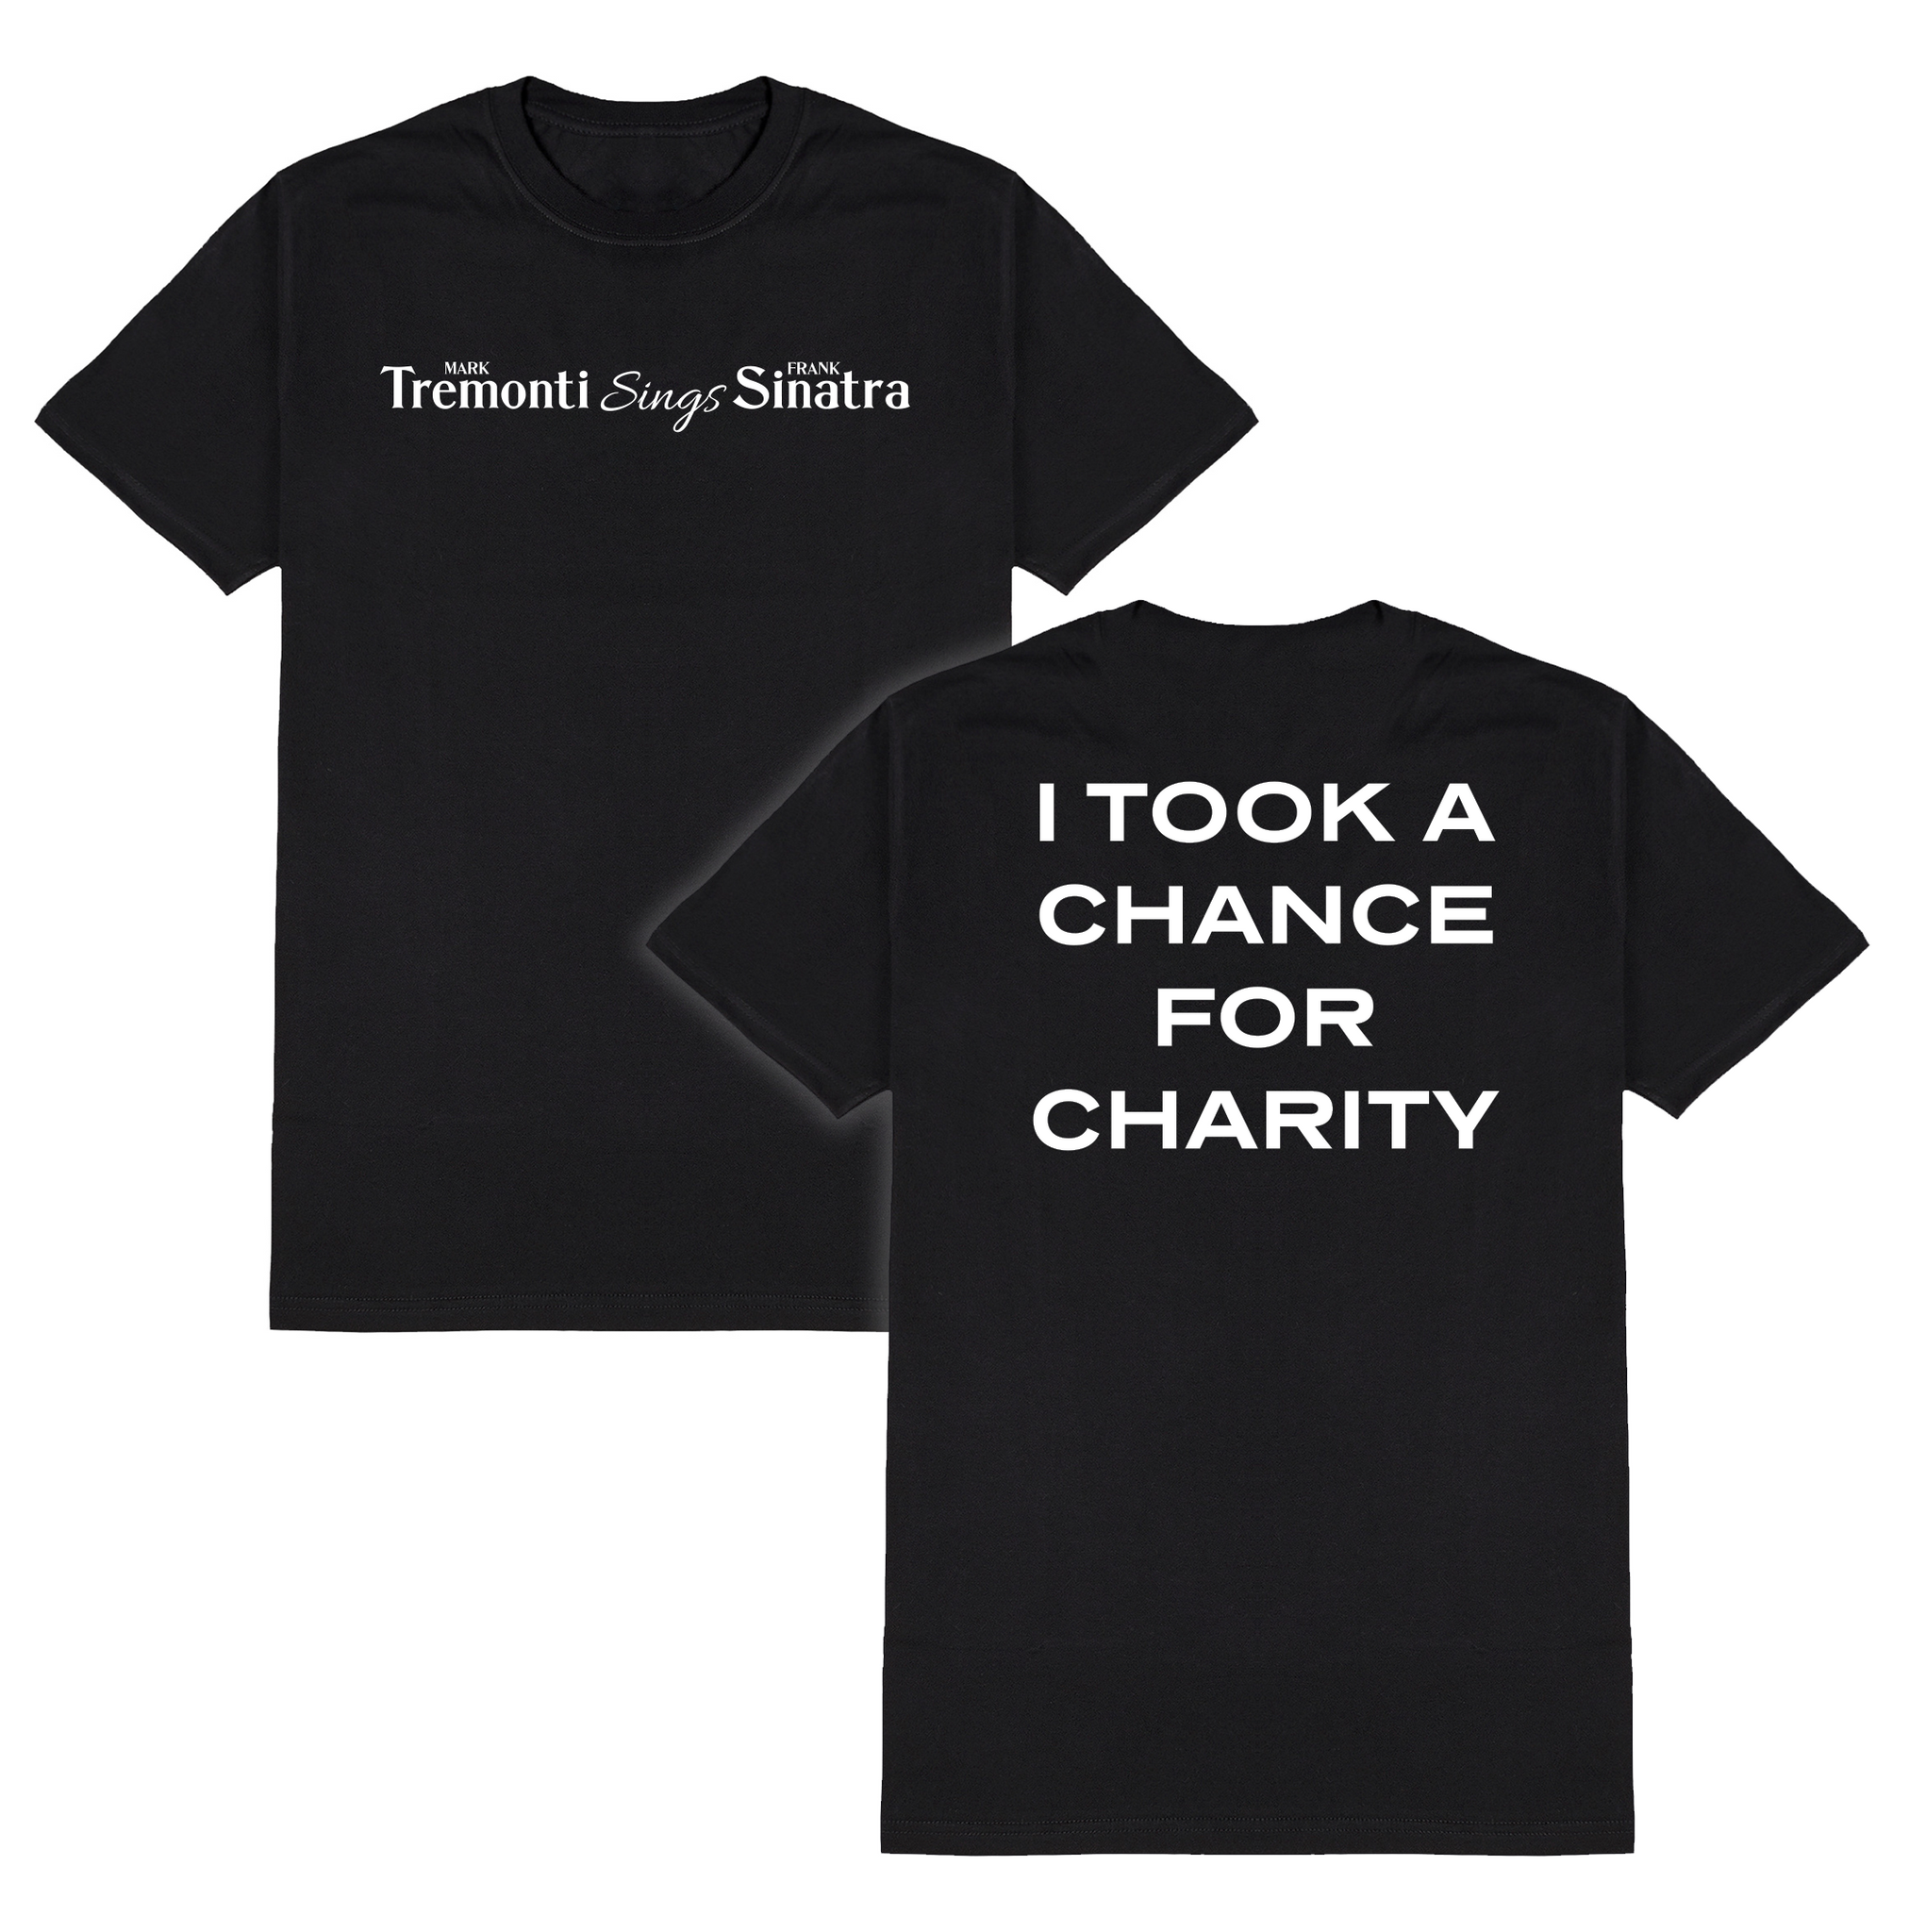 I Took A Chance For Charity - Tee